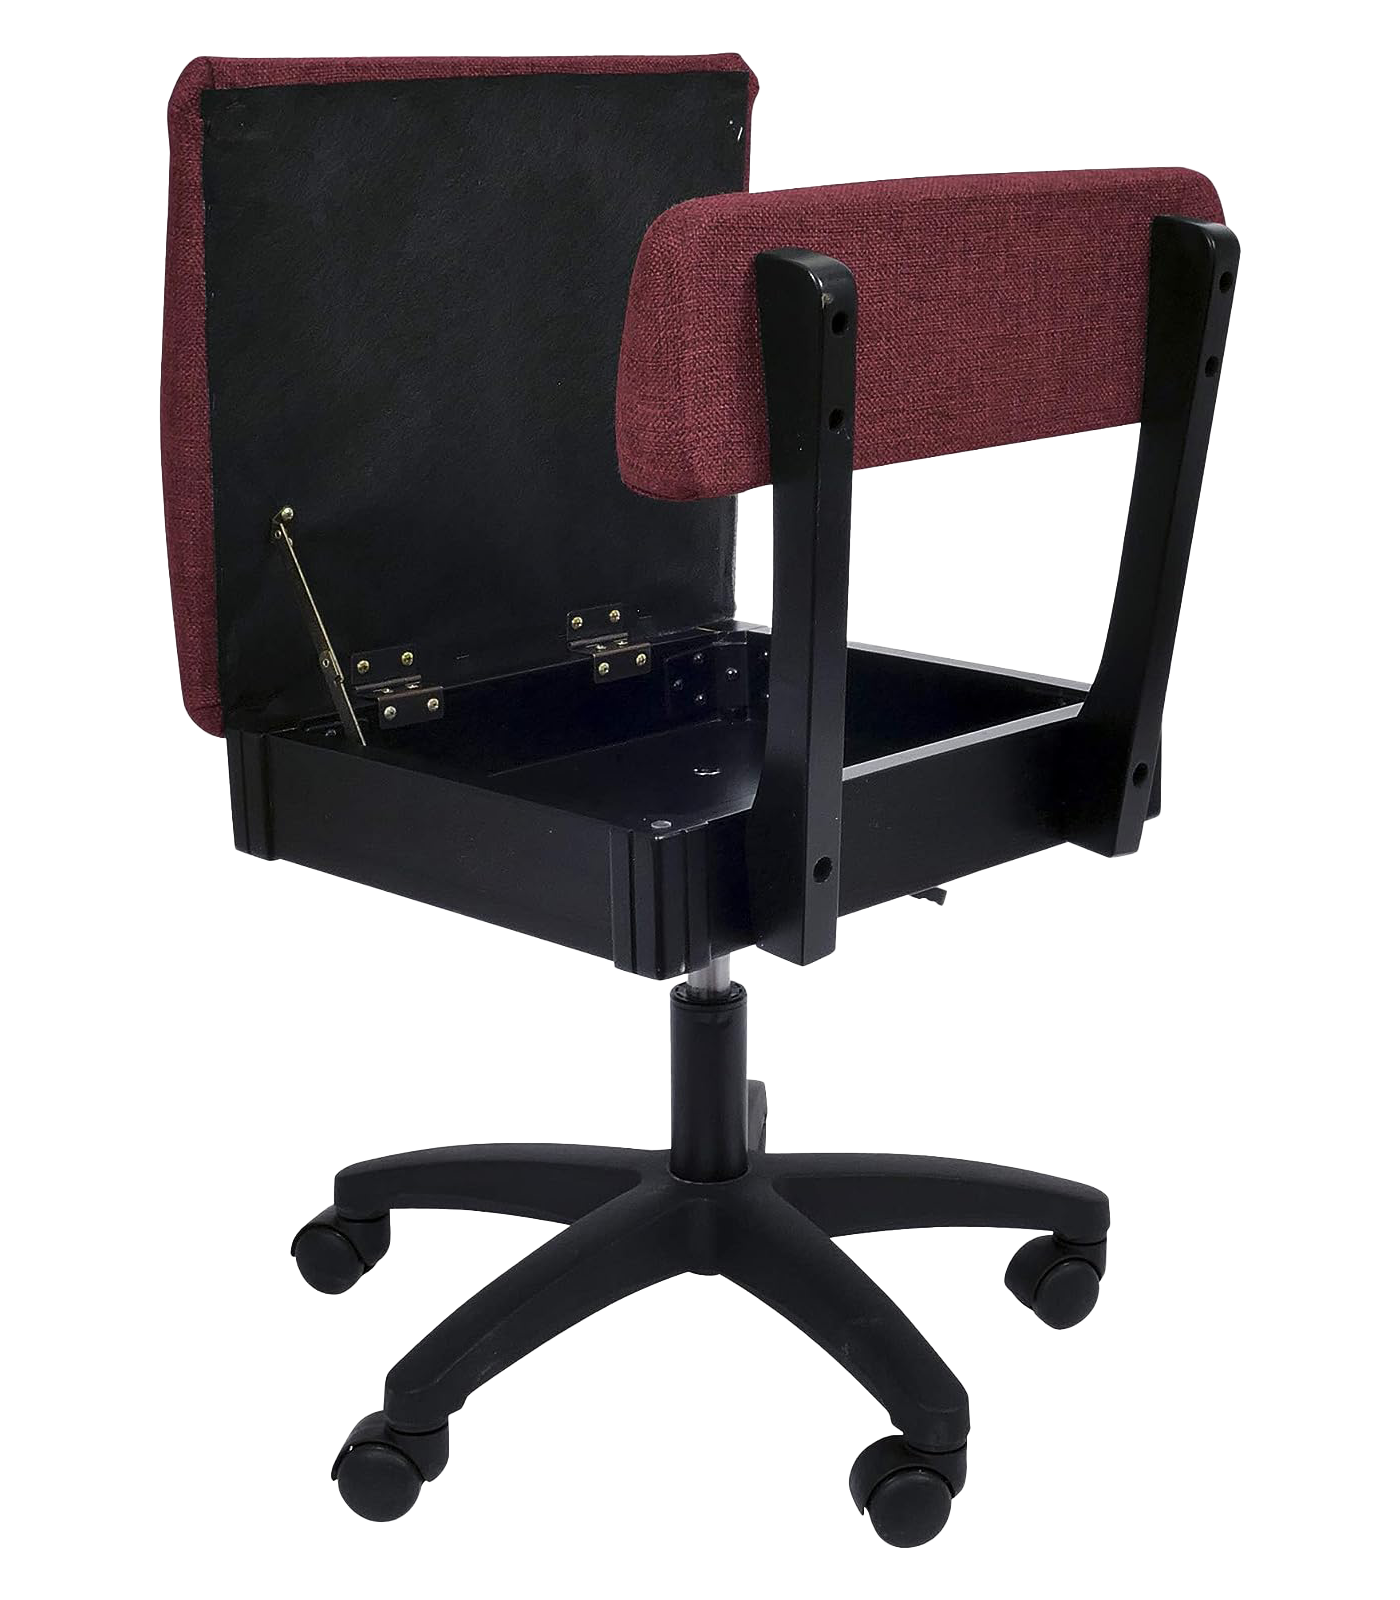 Arrow Sewing Height Adjustable Hydraulic Sewing Chair H8150 Crown Ruby for Sale at World Weidner